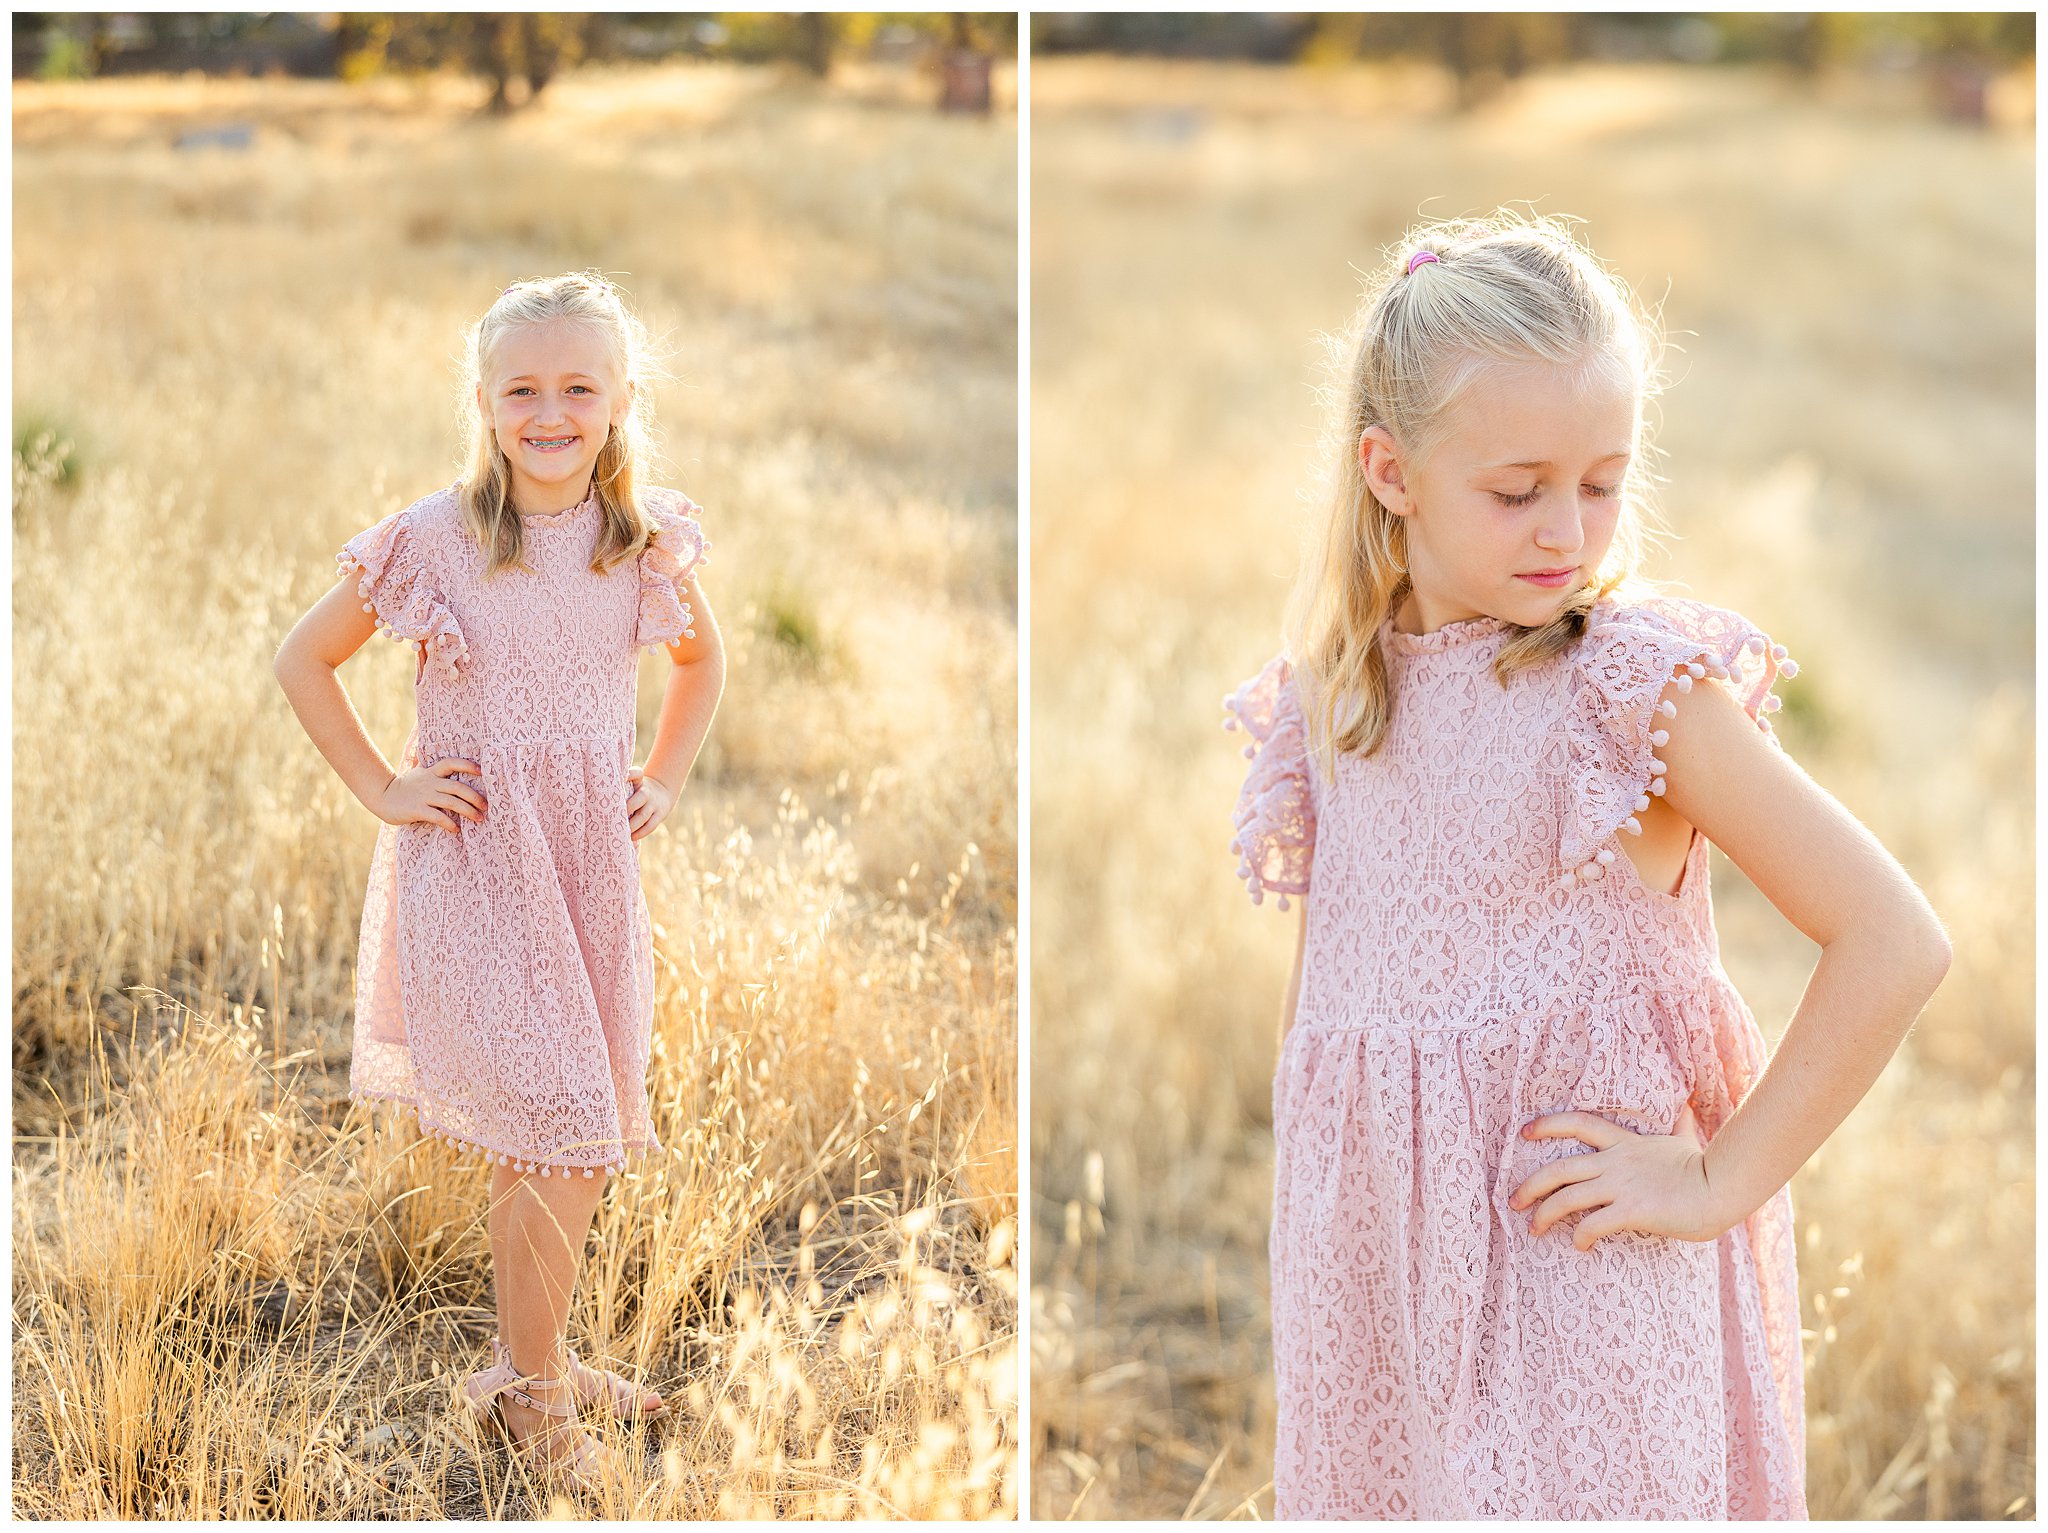 Mother Daughter Family Session Grass Field Chico CA Pink White Pastels Fall September,